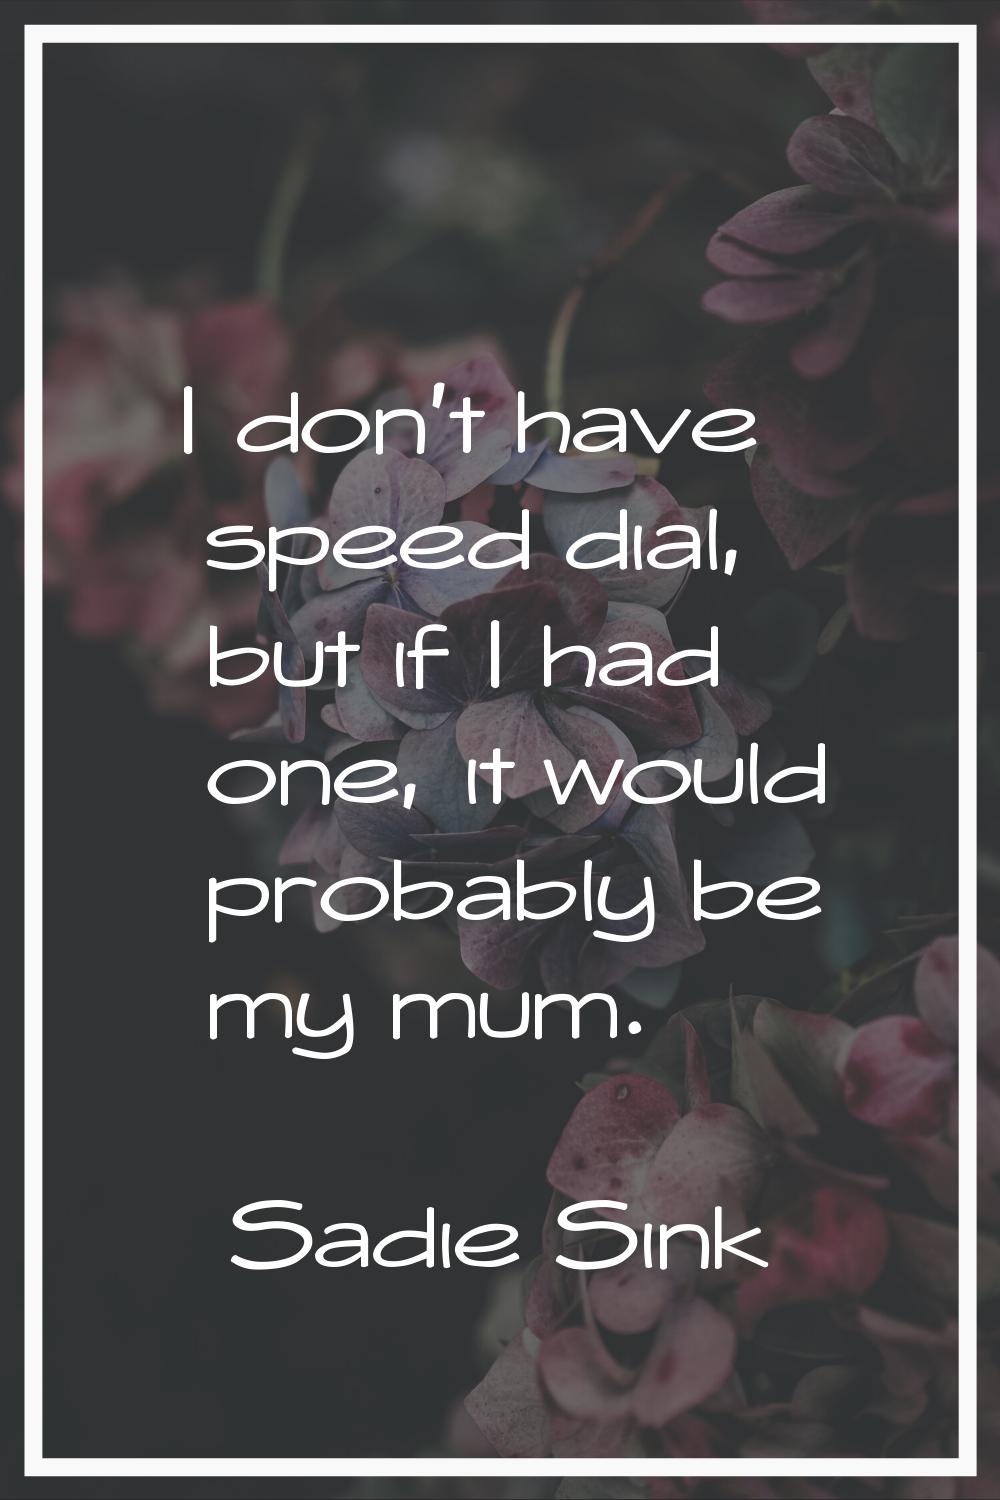 I don't have speed dial, but if I had one, it would probably be my mum.